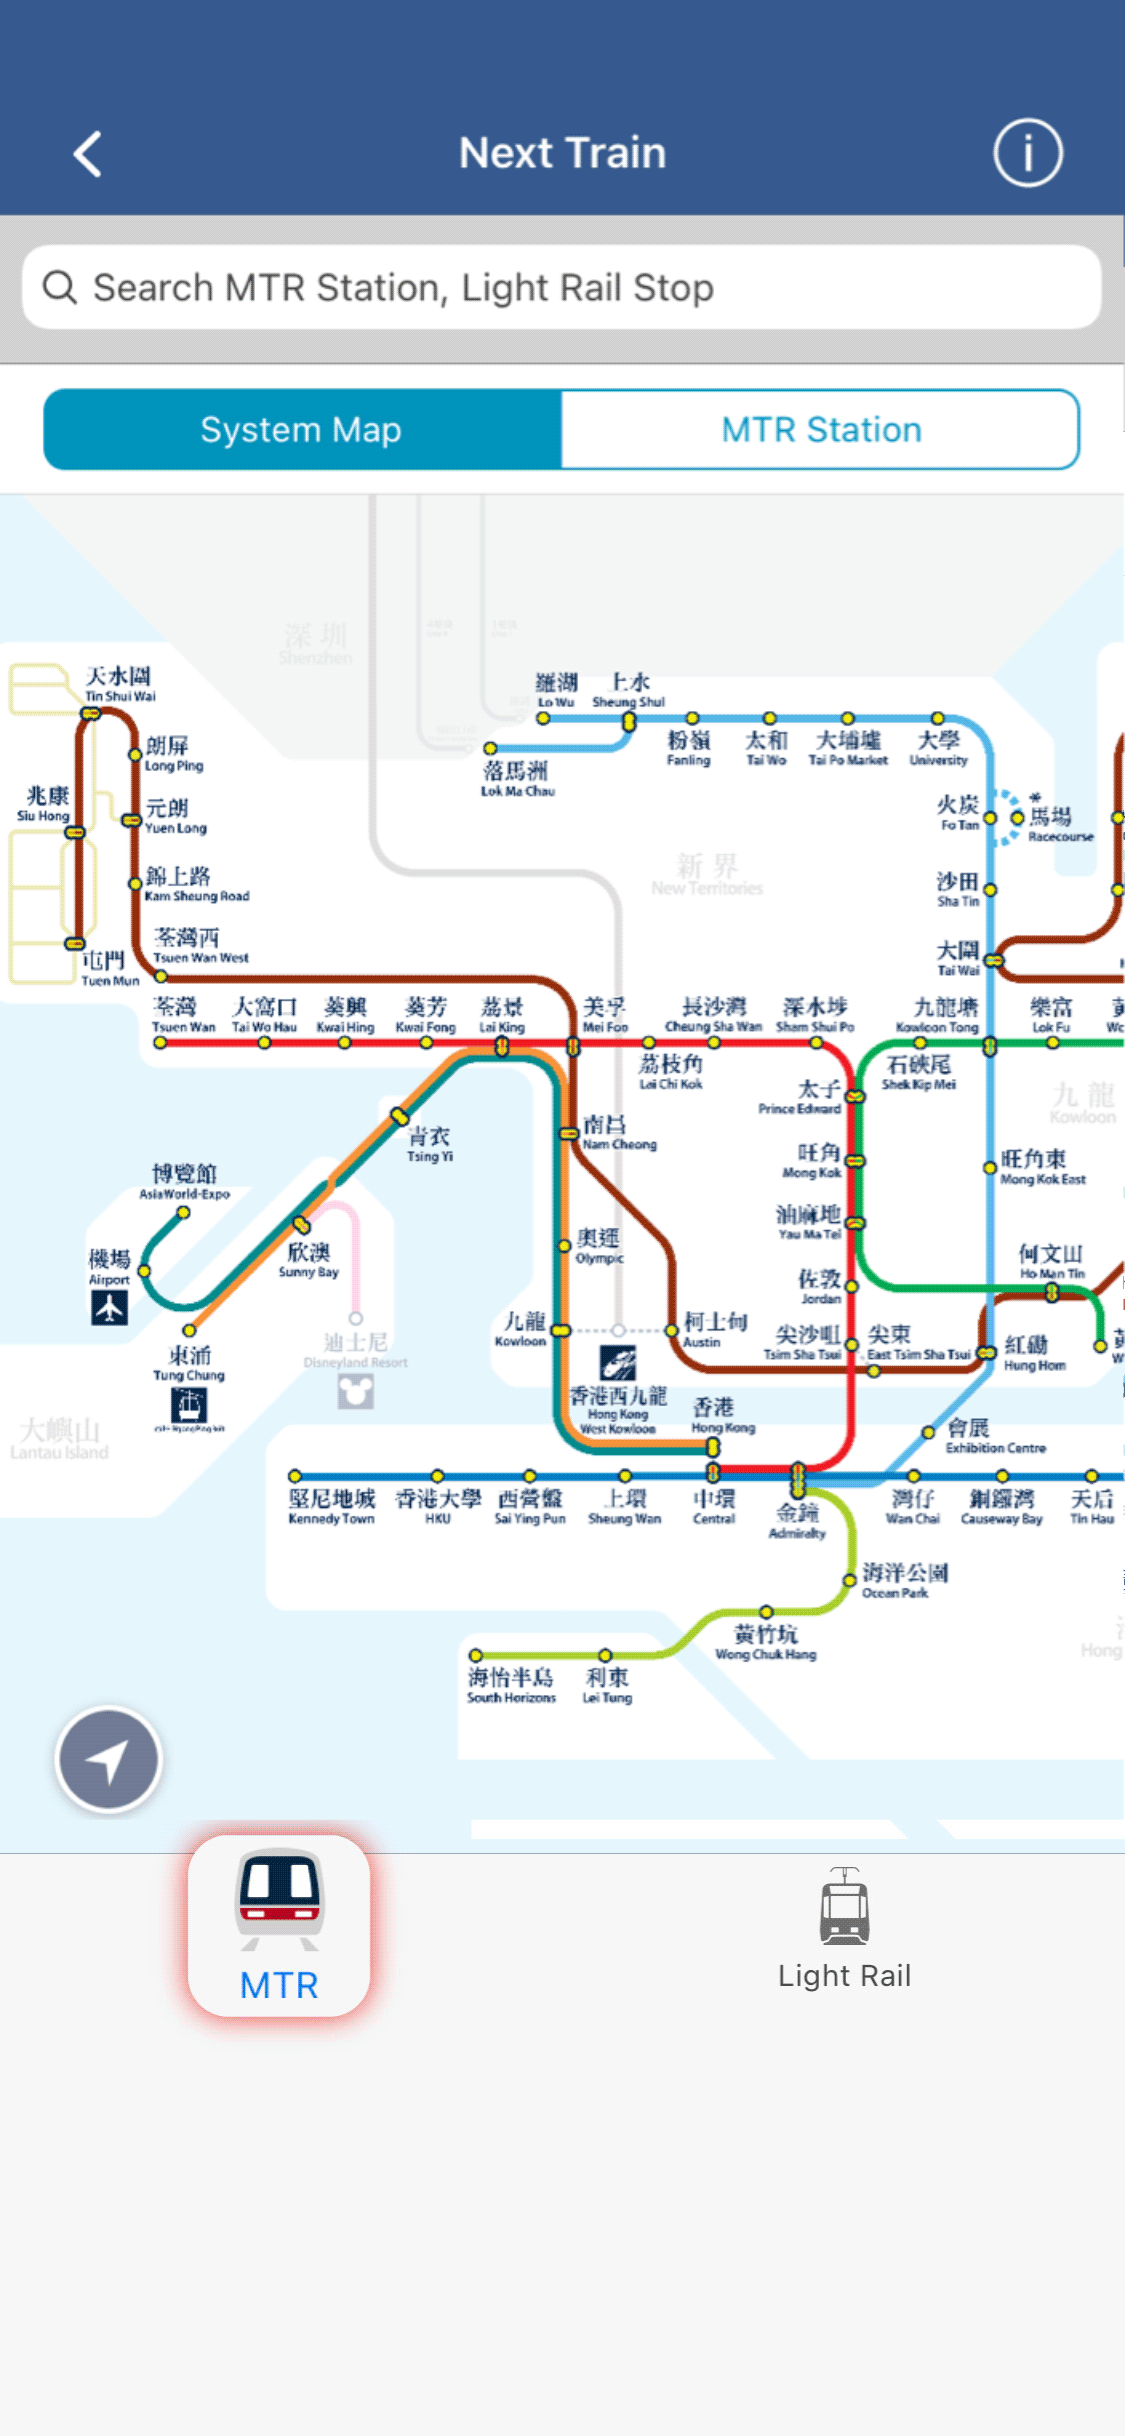 Select 'MTR' and choose your departing station from available lines and the next train information will be provided OR Select 'Light Rail' and indicate the Light Rail Stop you need, for example: 'Siu Hong'